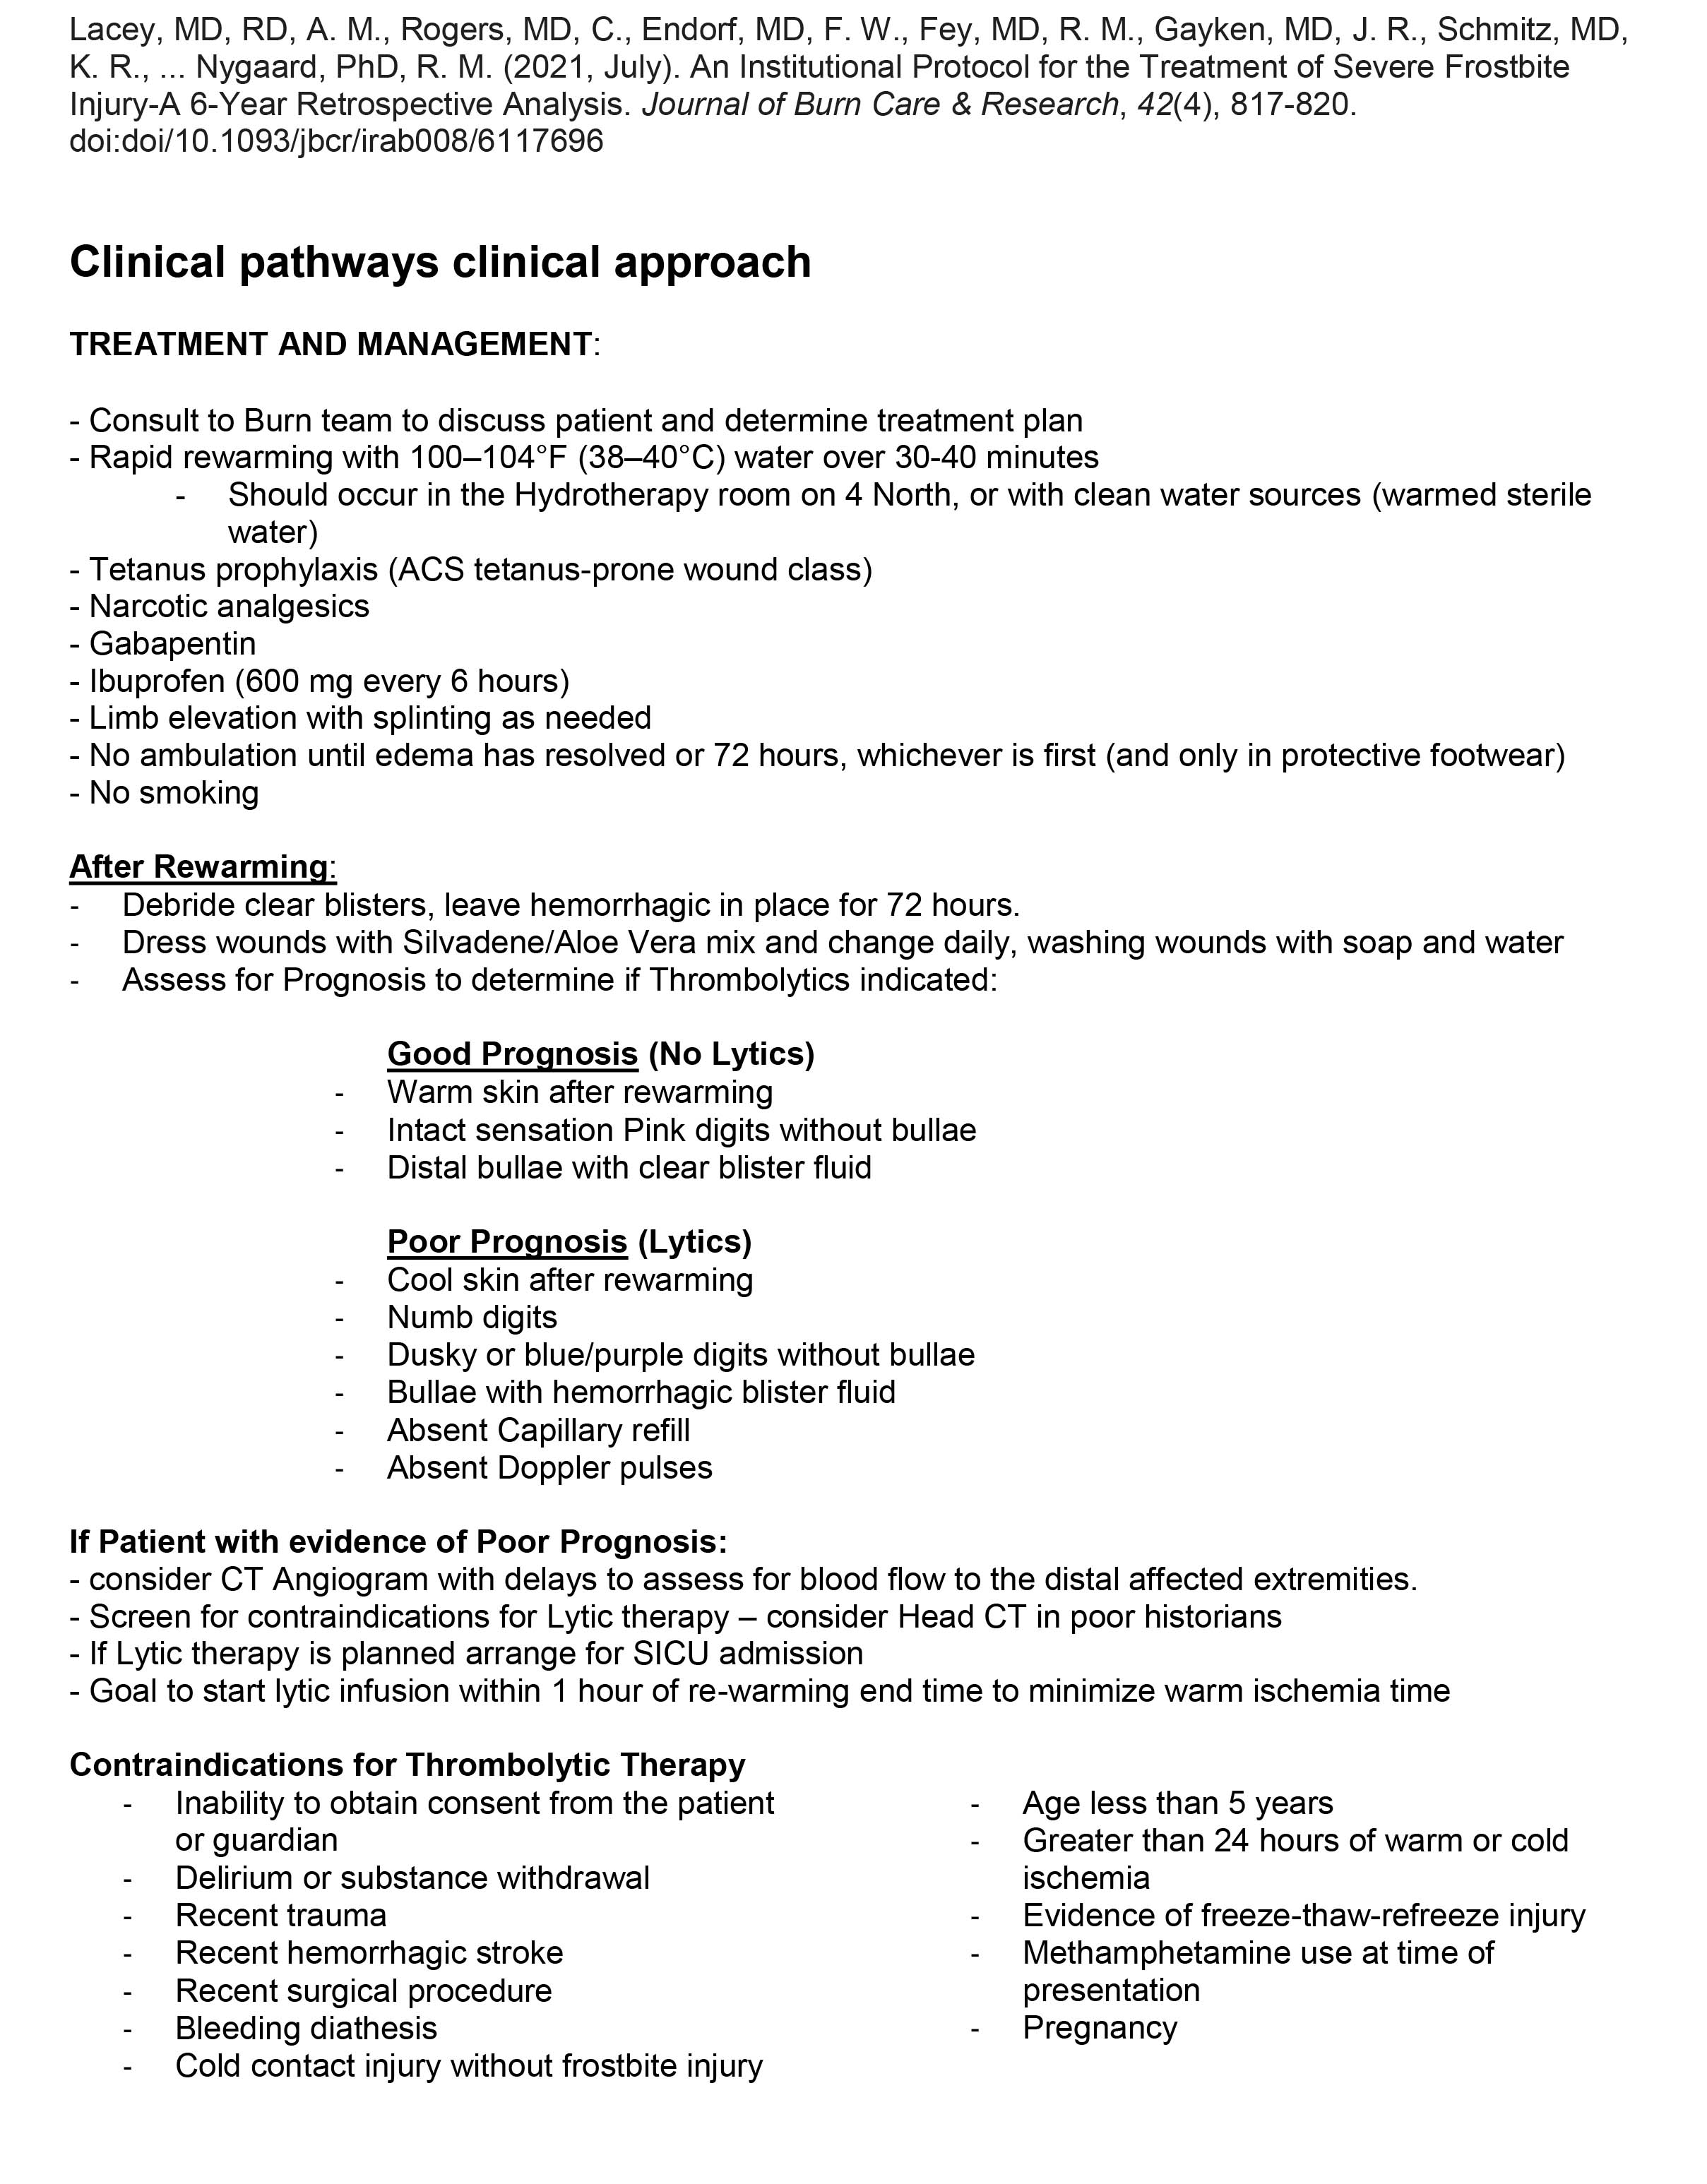 inpatient frostbite guideline page two